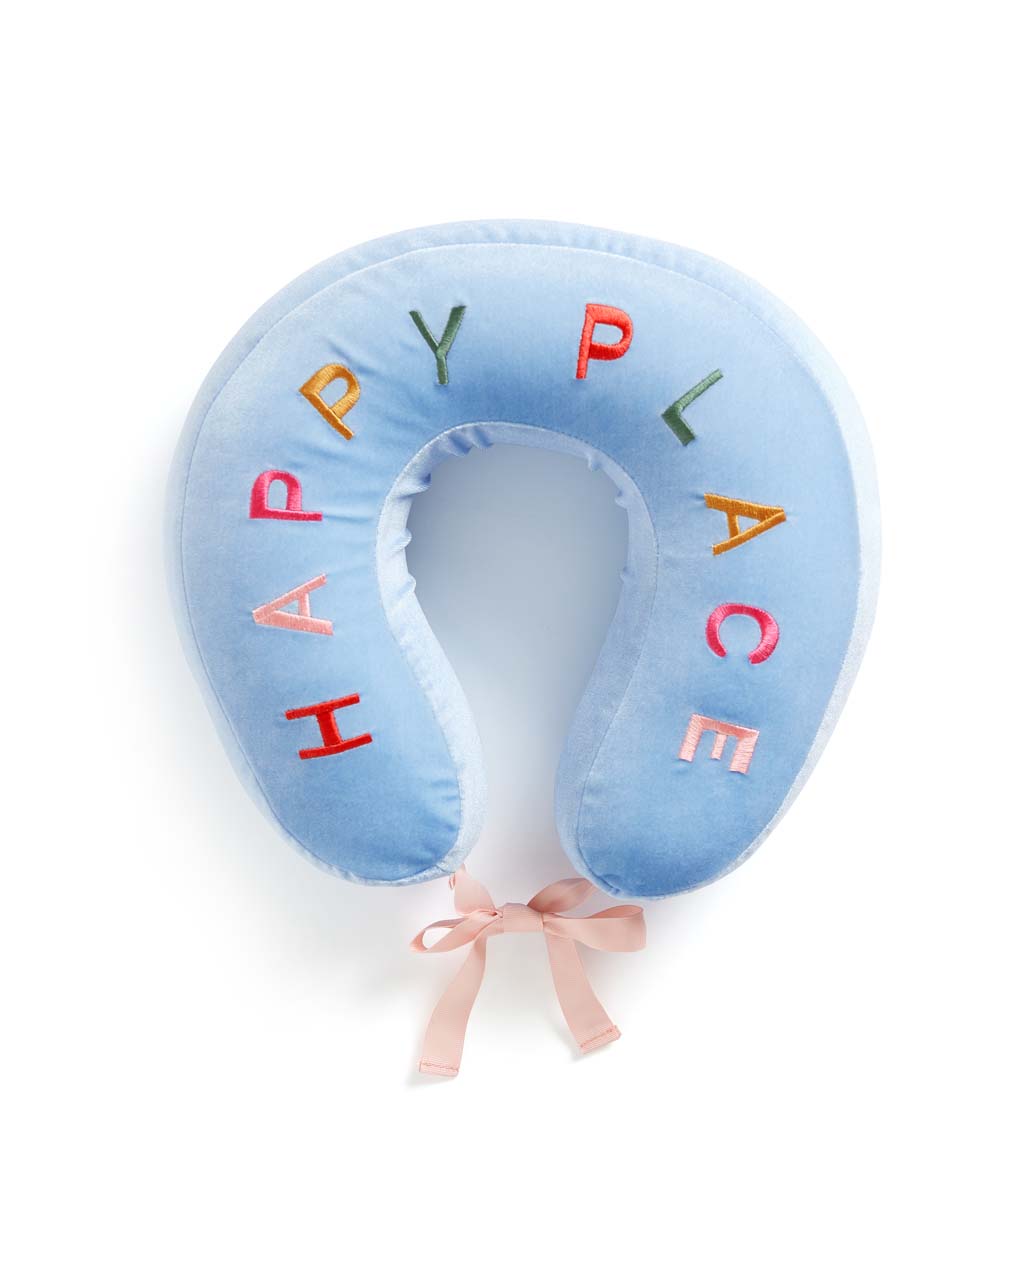 Getaway Travel Pillow - Happy Place by 